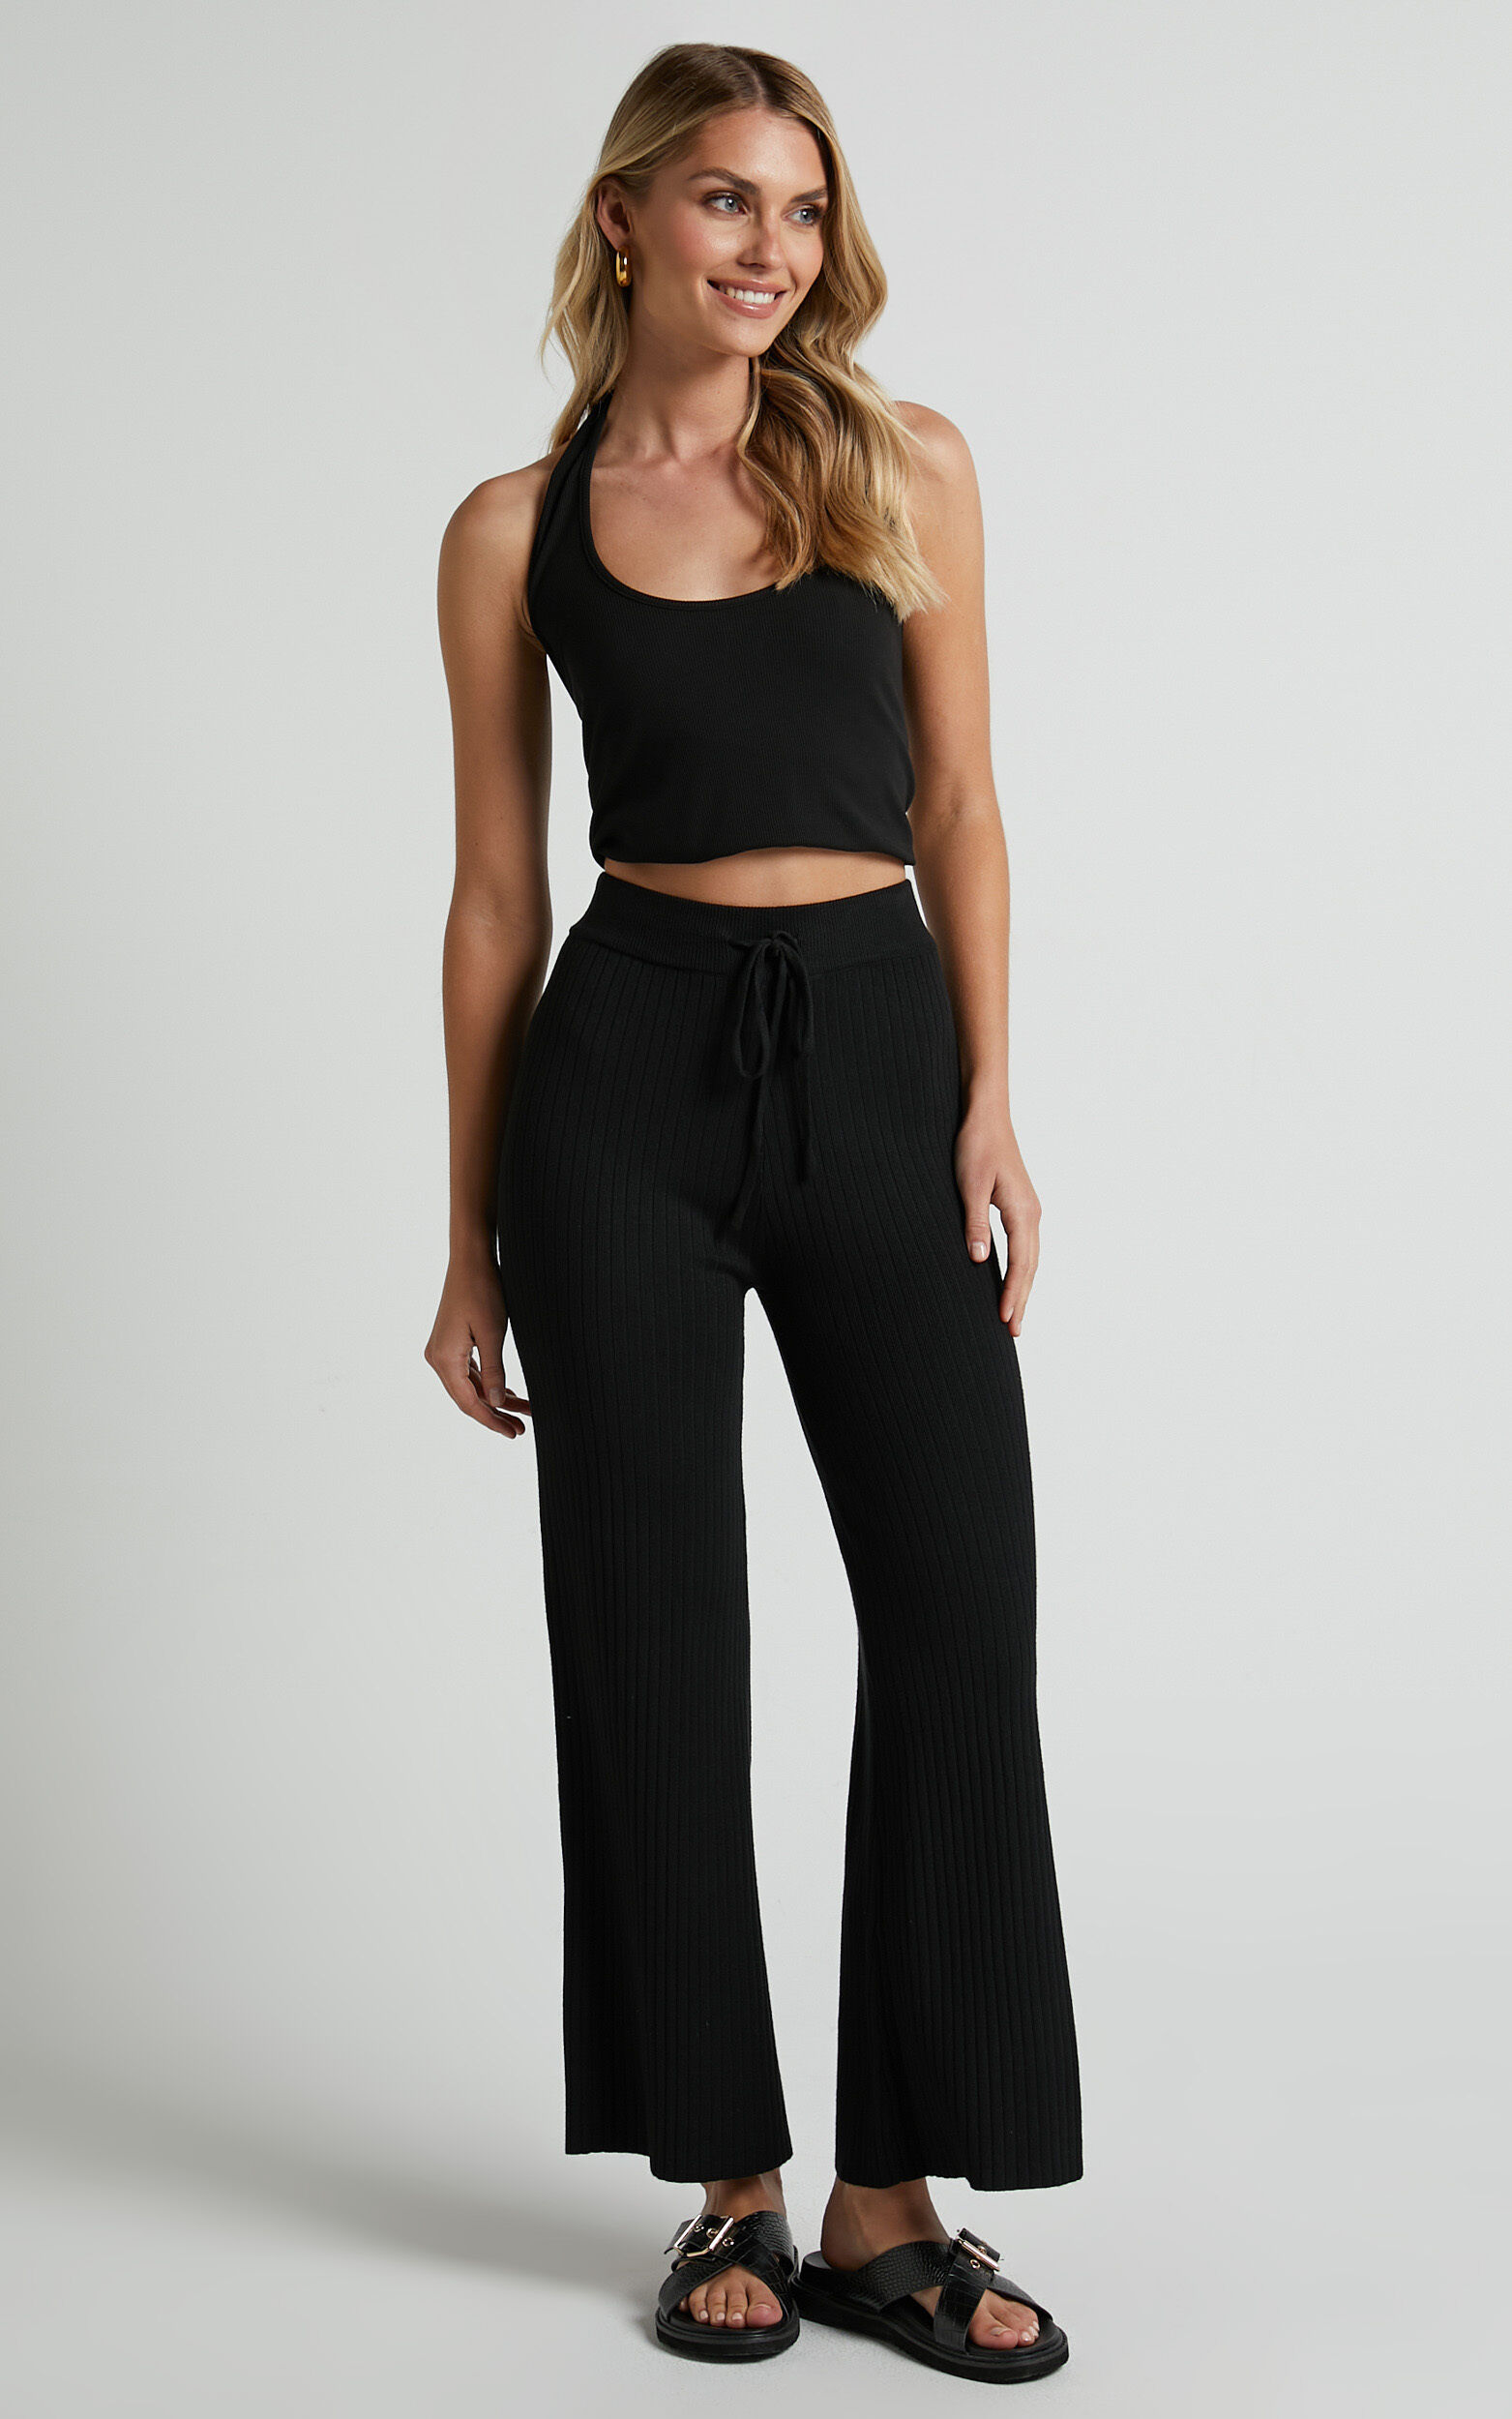 Ribbed Knit High Waisted Flared Pants - Black